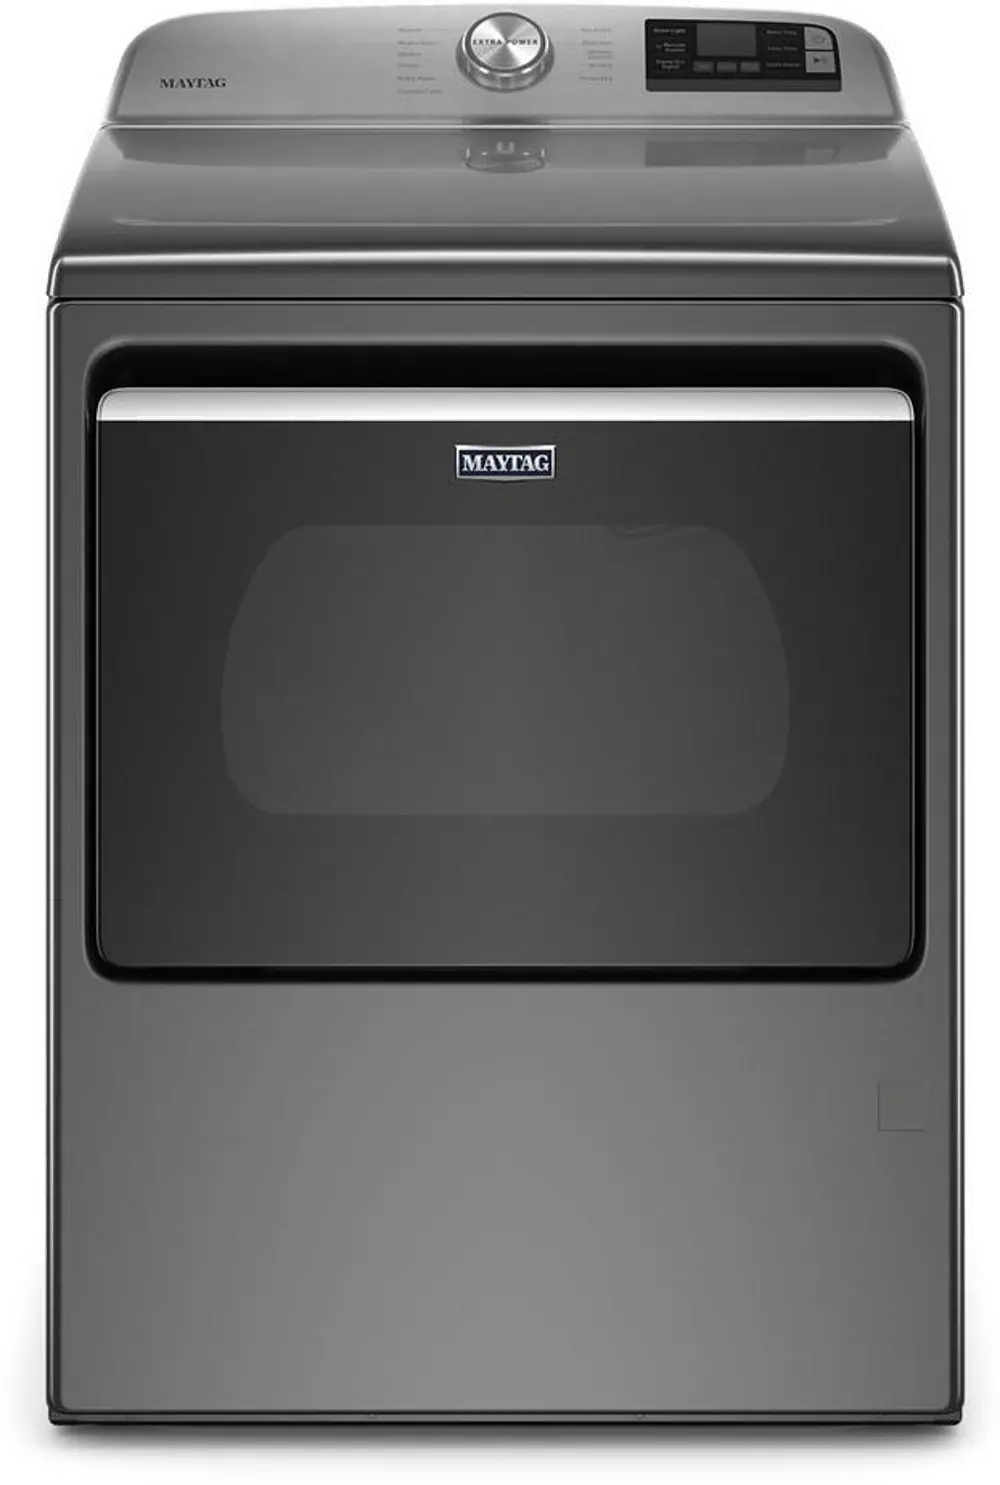 MGD6230HC Maytag Gas Dryer with Extra Power - 7.4 Cu. Ft. Metallic Slate-1